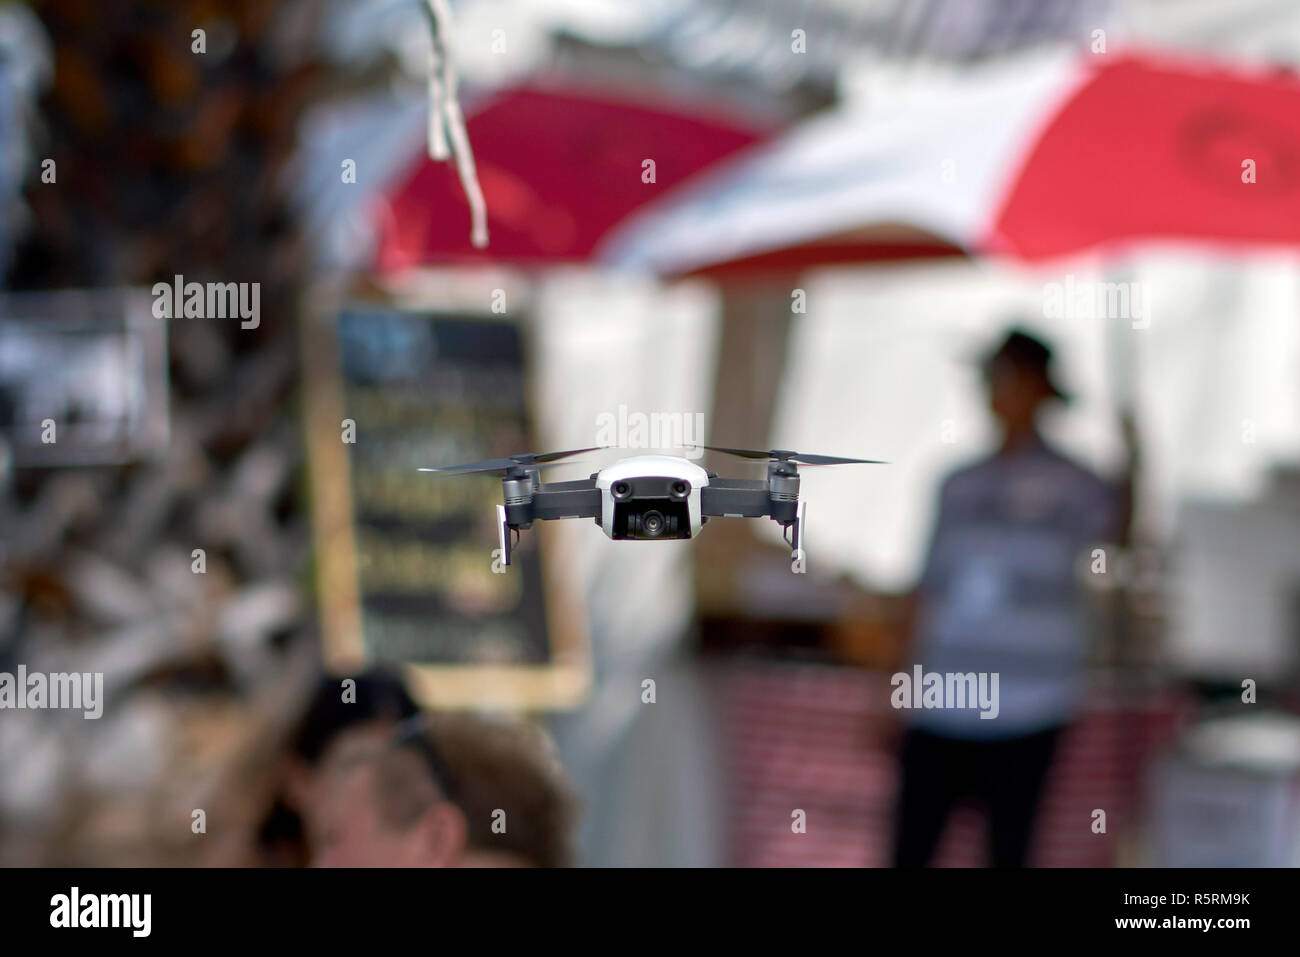 DJI Mavic Air drone flying low amongst the crowd at a demonstration Stock Photo